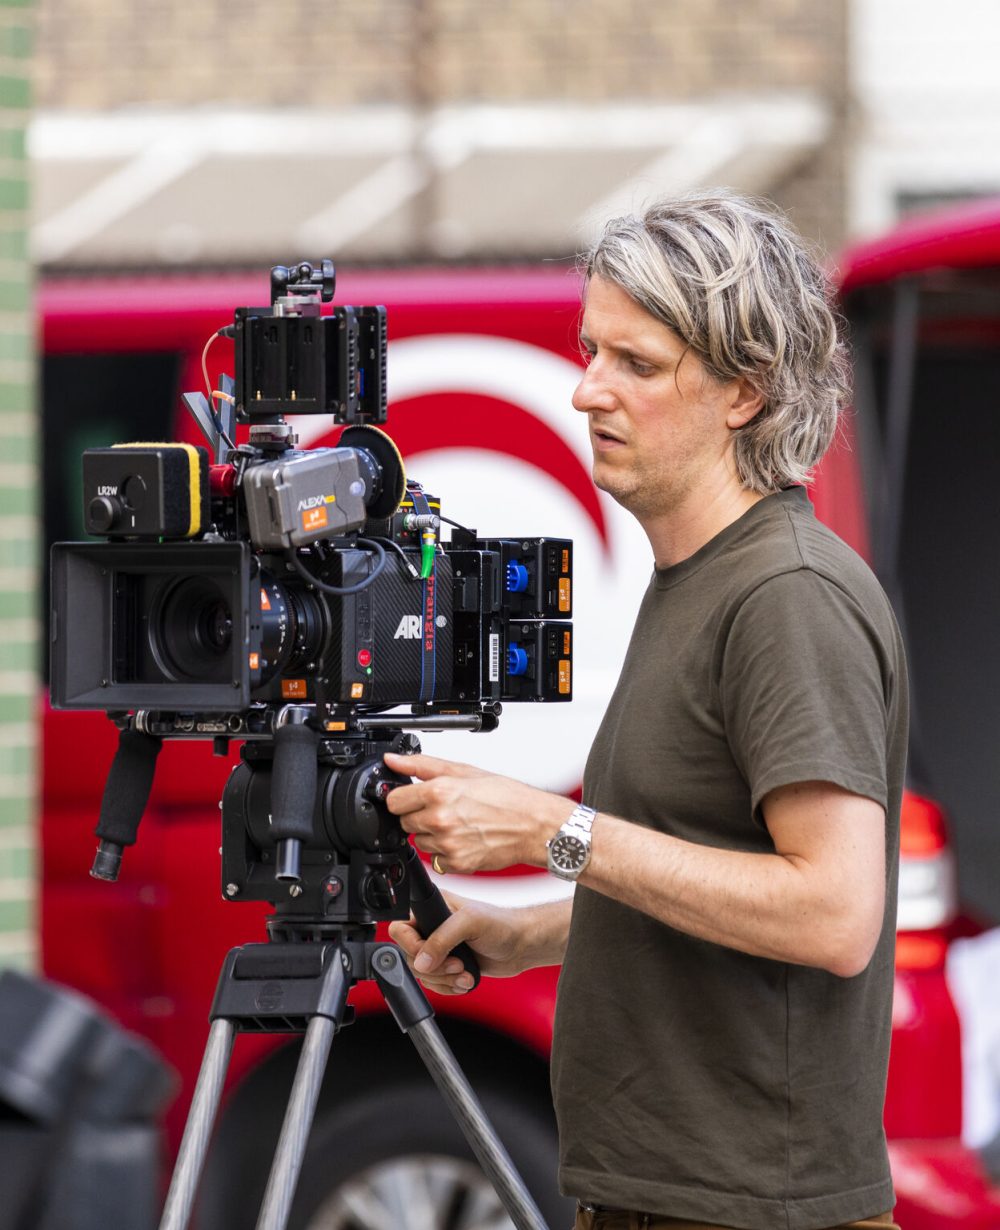 Focused man operating an ARRI camera on a tripod, with an urban backdrop and a red van, outdoors.